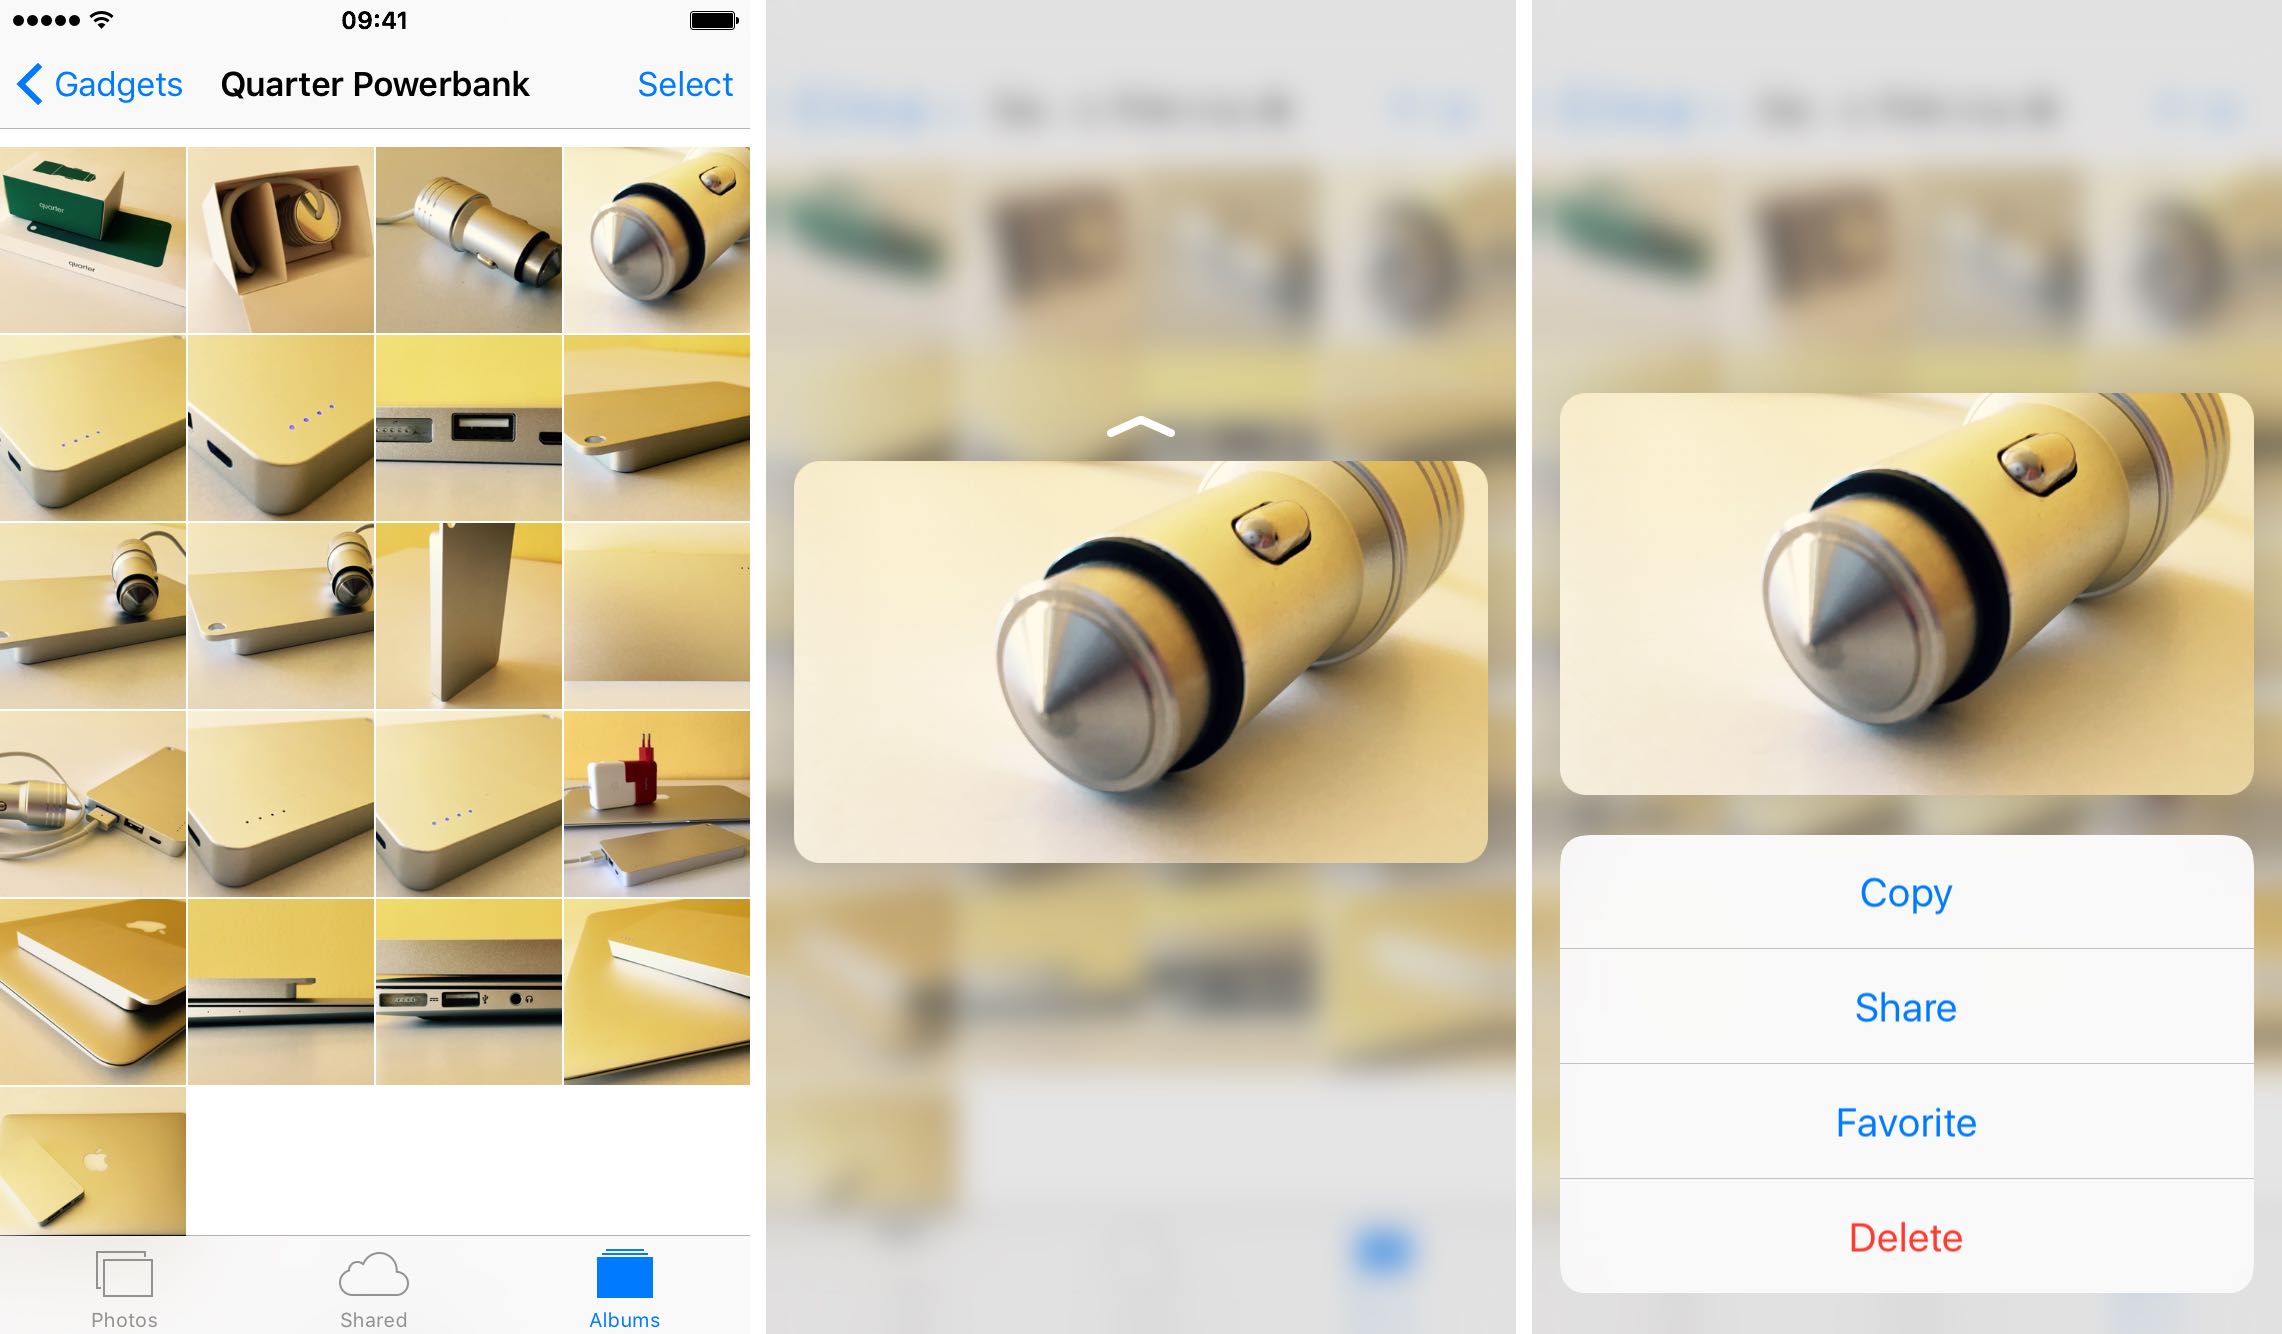 Preview a photo with 3D Touch